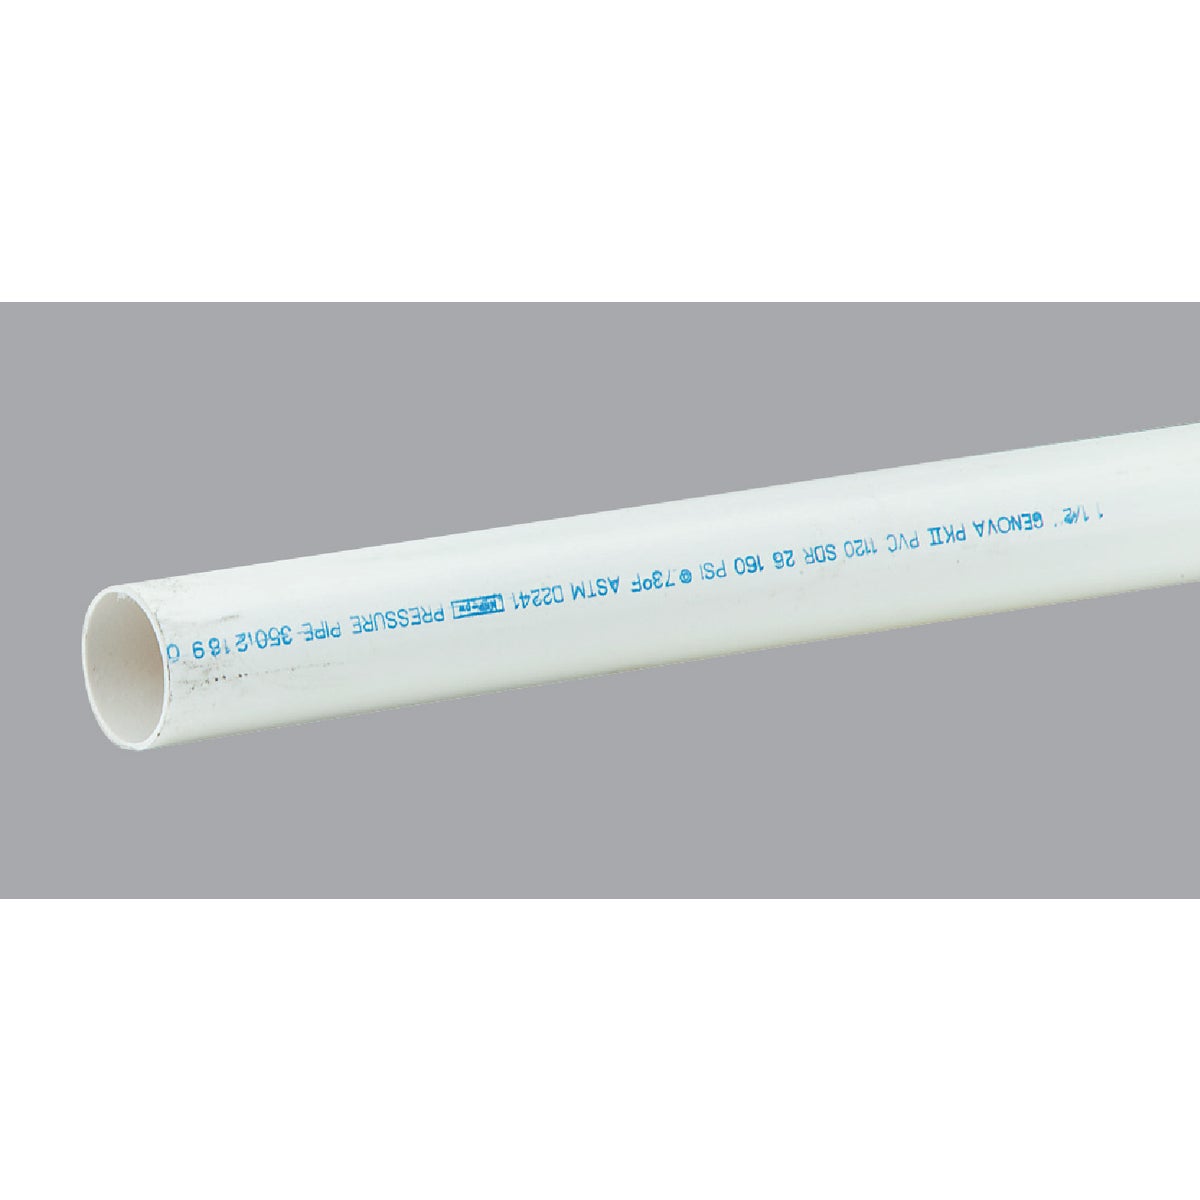 Charlotte 1-1/2 In. x 10 Ft. Cold Water PVC Pressure Pipe, SDR 26